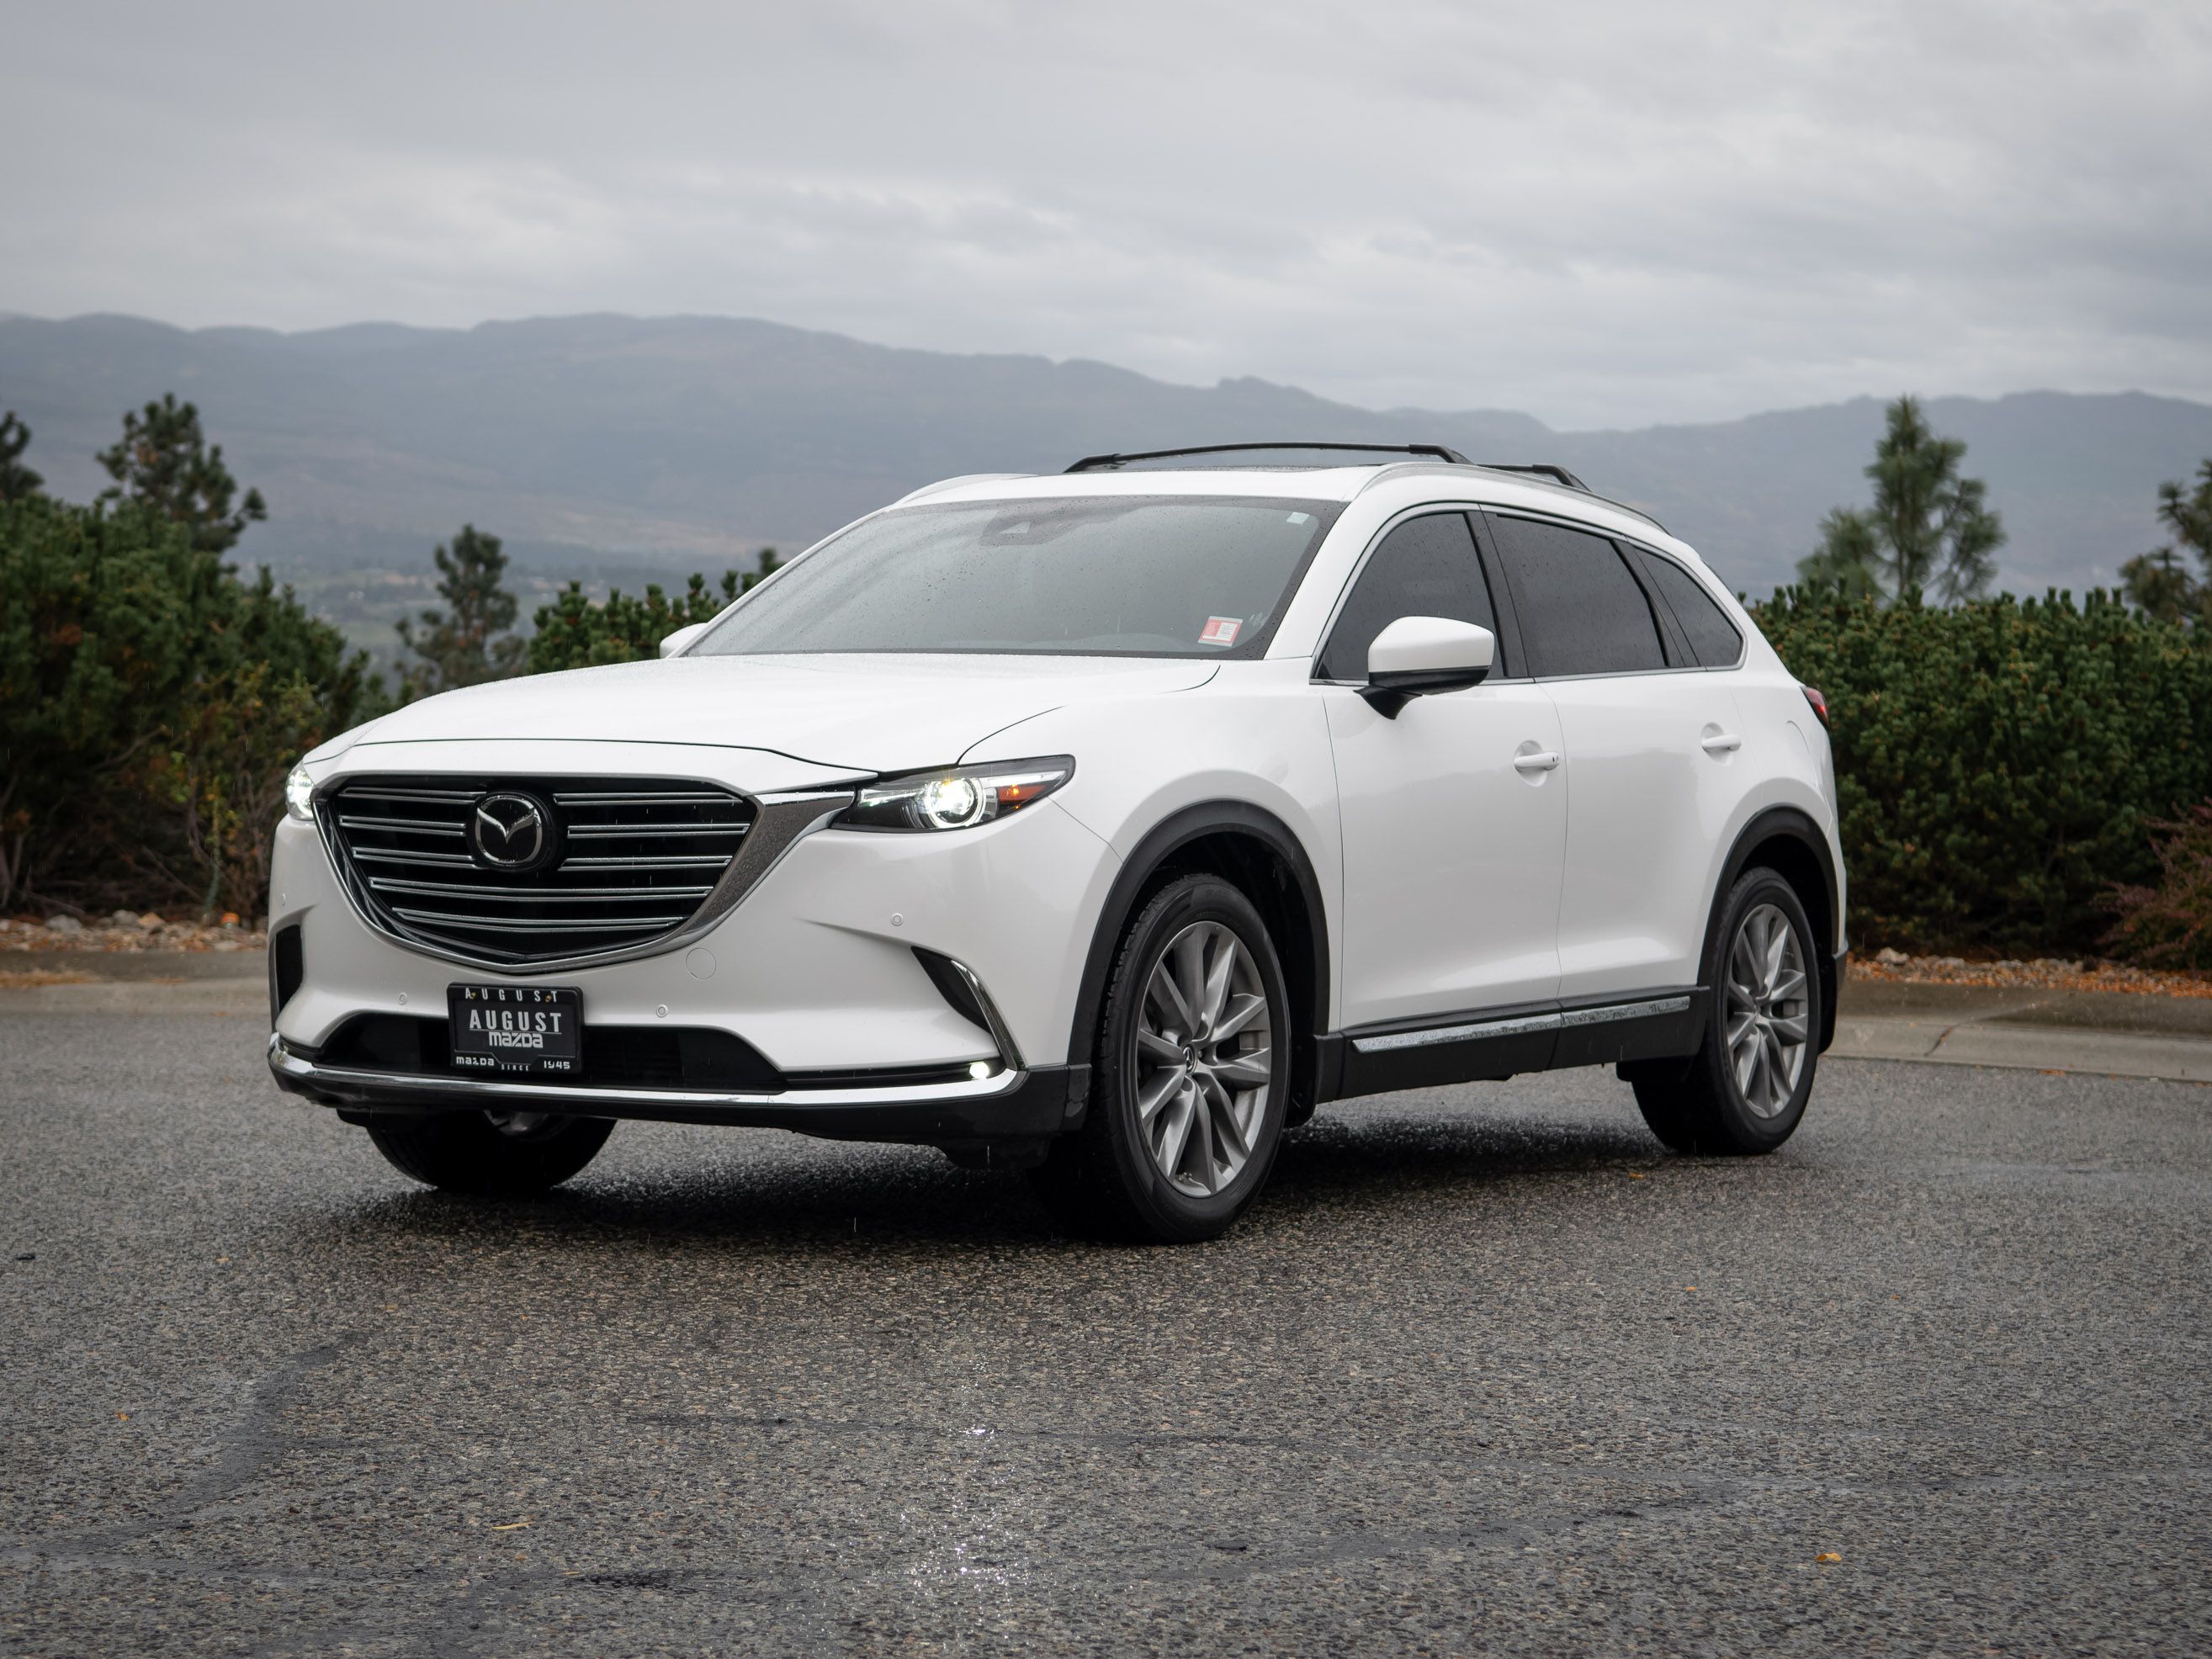 Pre-Owned 2018 Mazda CX-9 Signature With Navigation & AWD